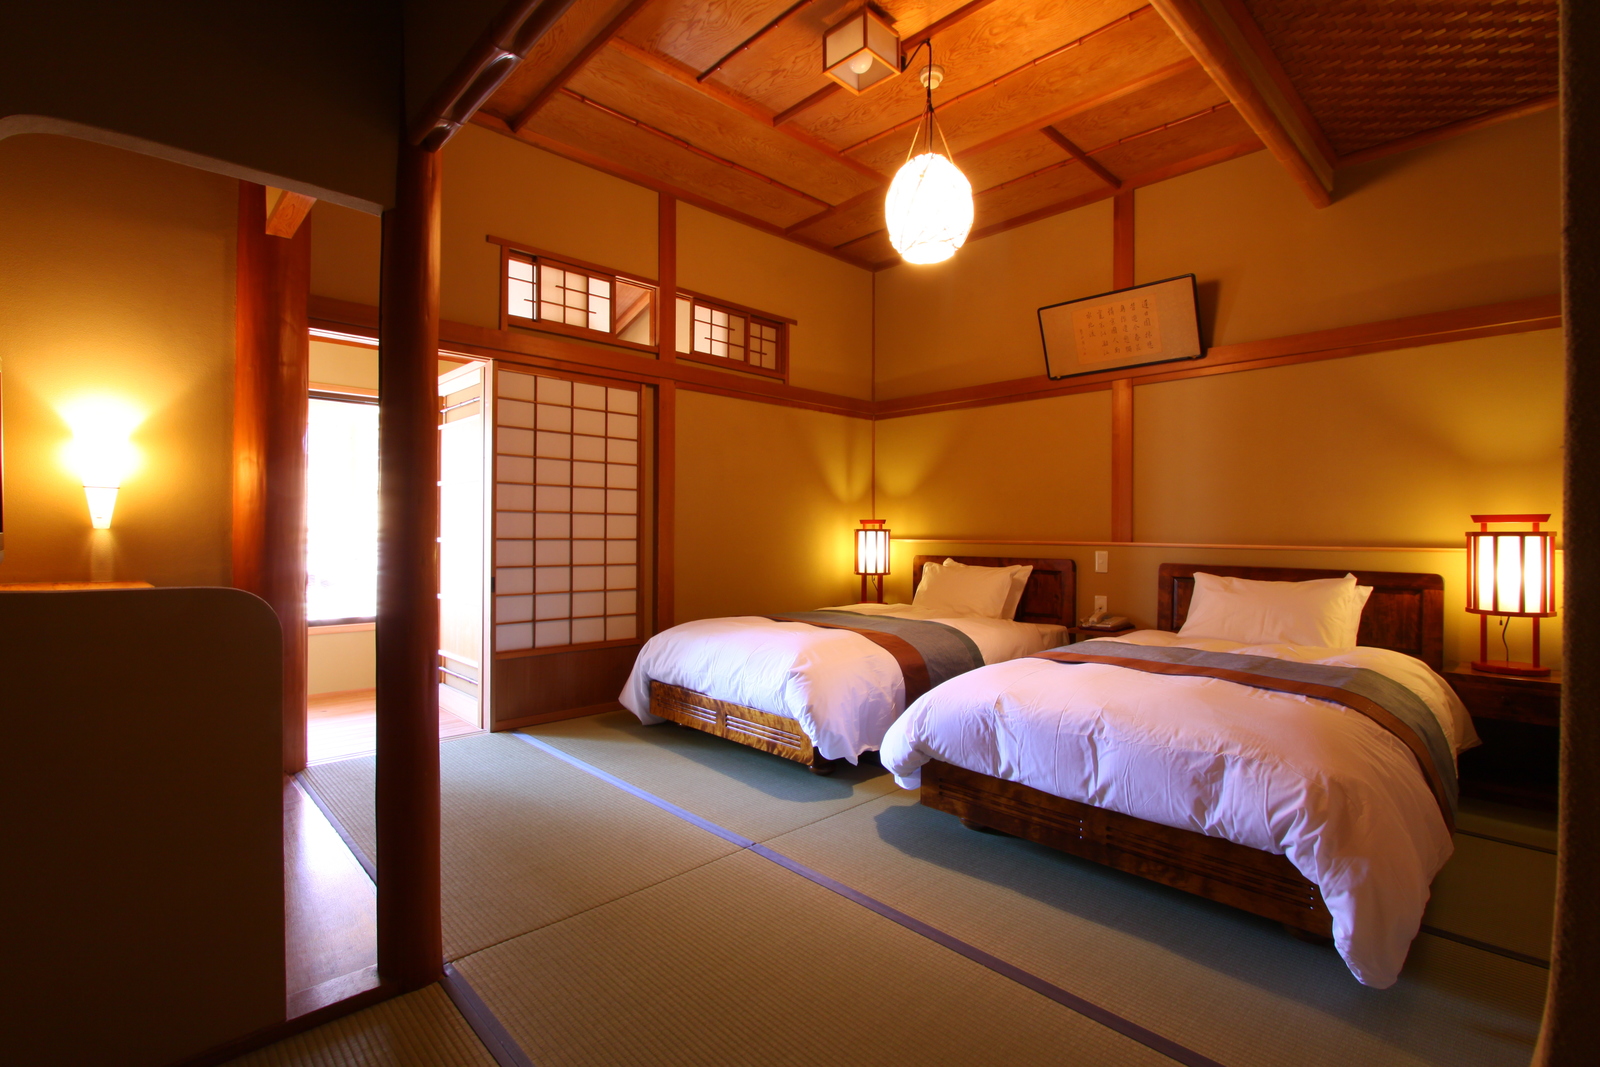 An Ode to Nagano’s Grandest Ryokans (Traditional Japanese Inns)